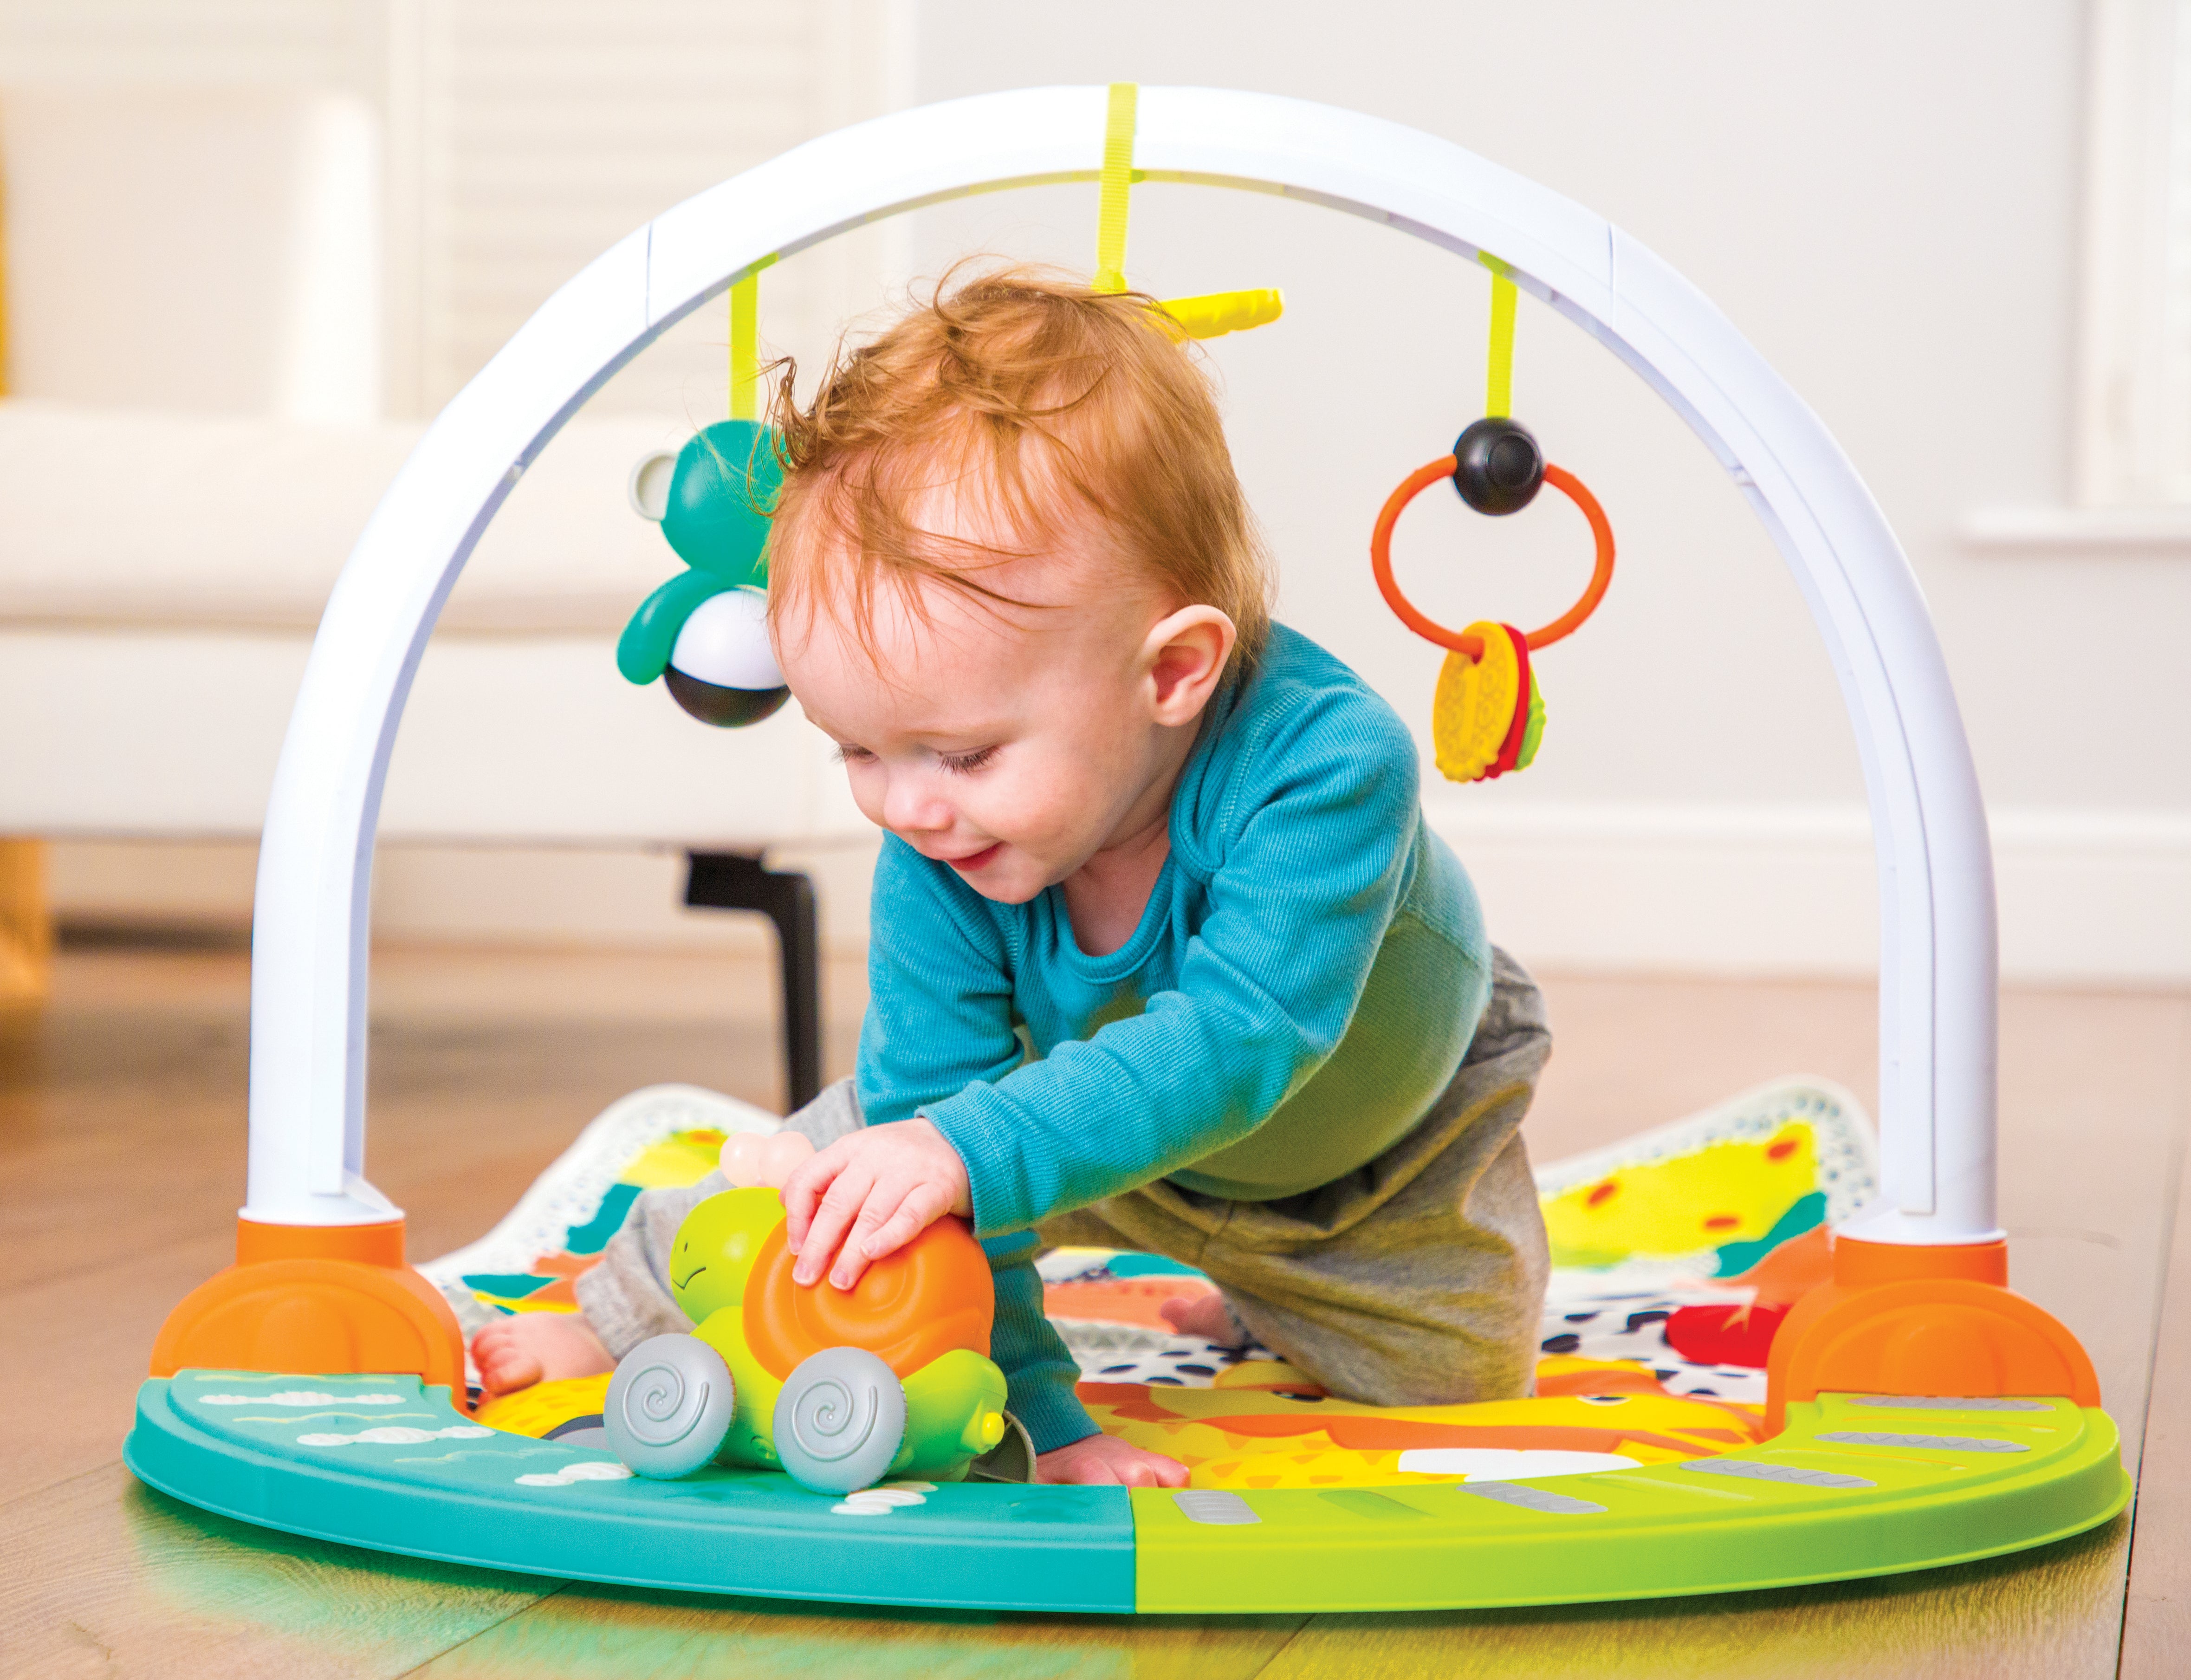 Infantino - Watch Me Grow 4-In-1 Activity Gym